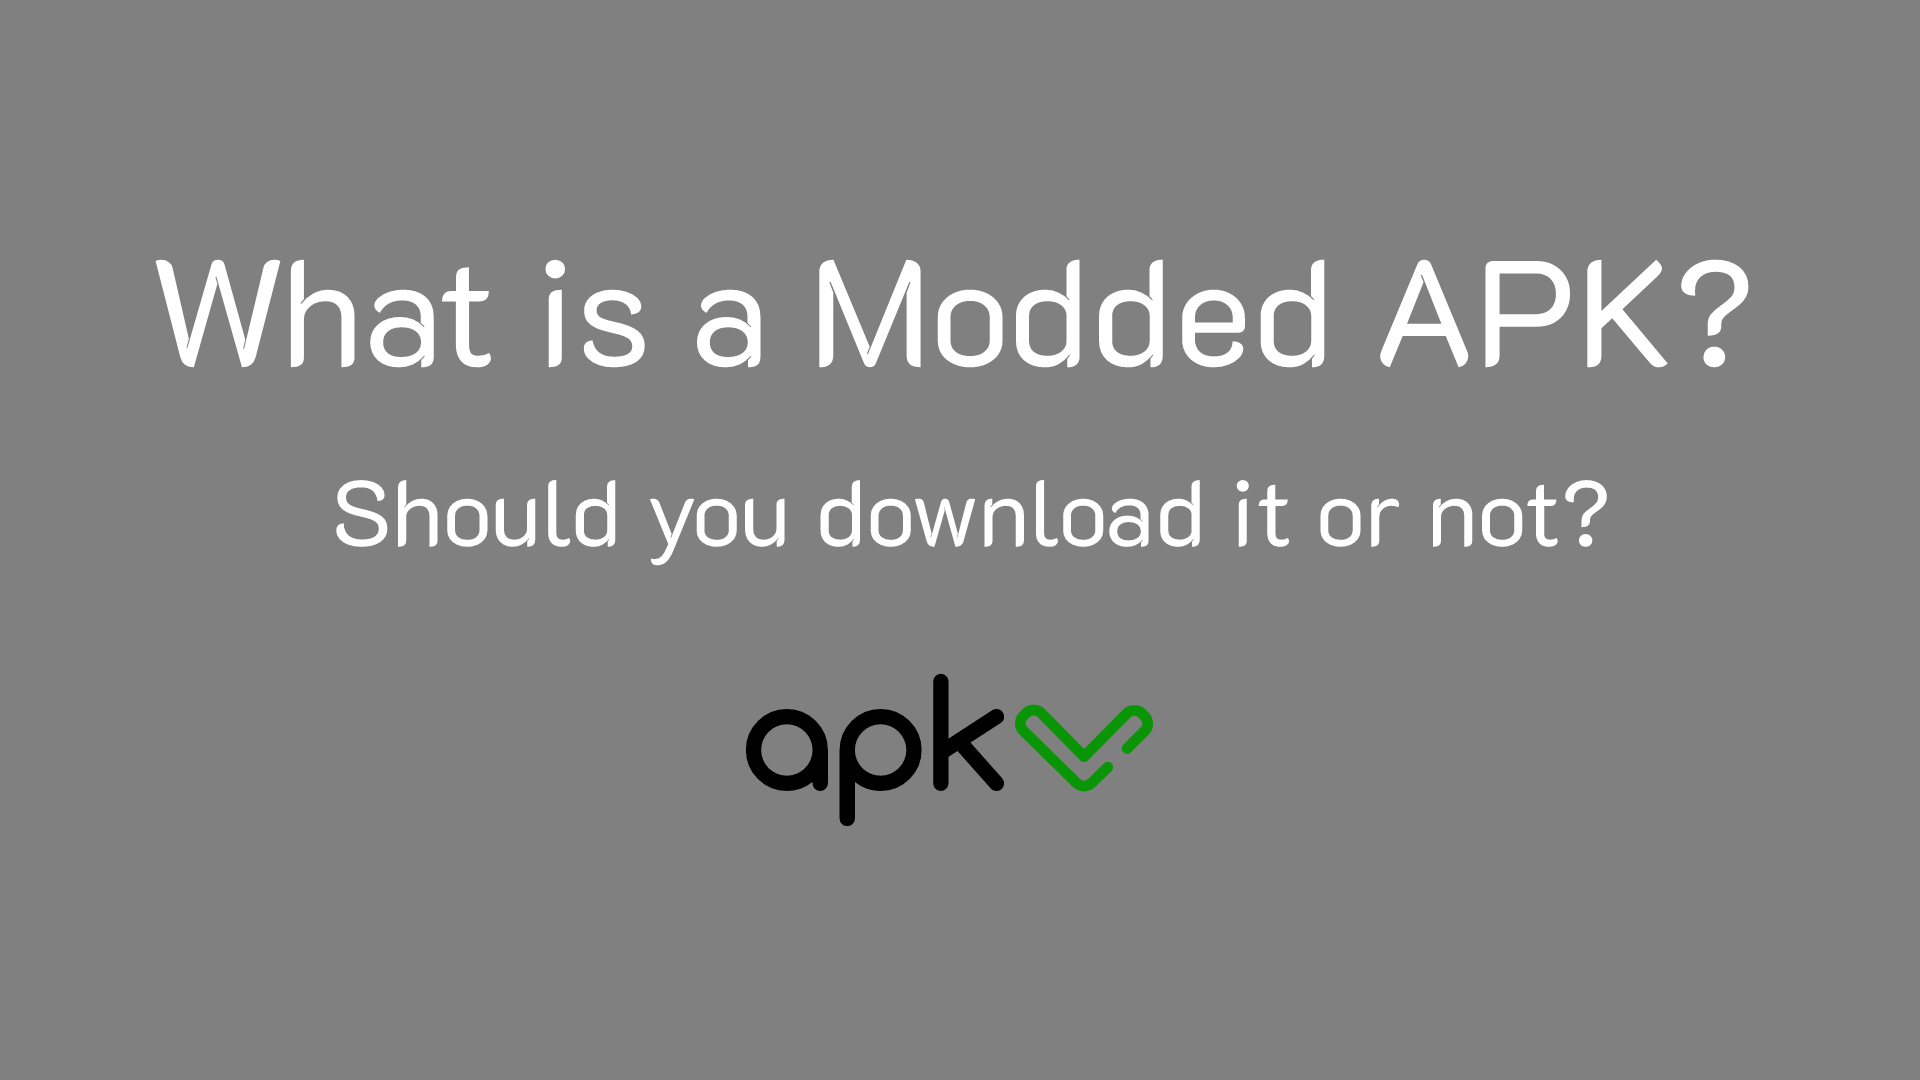 What is Modded APK? Should you download it?